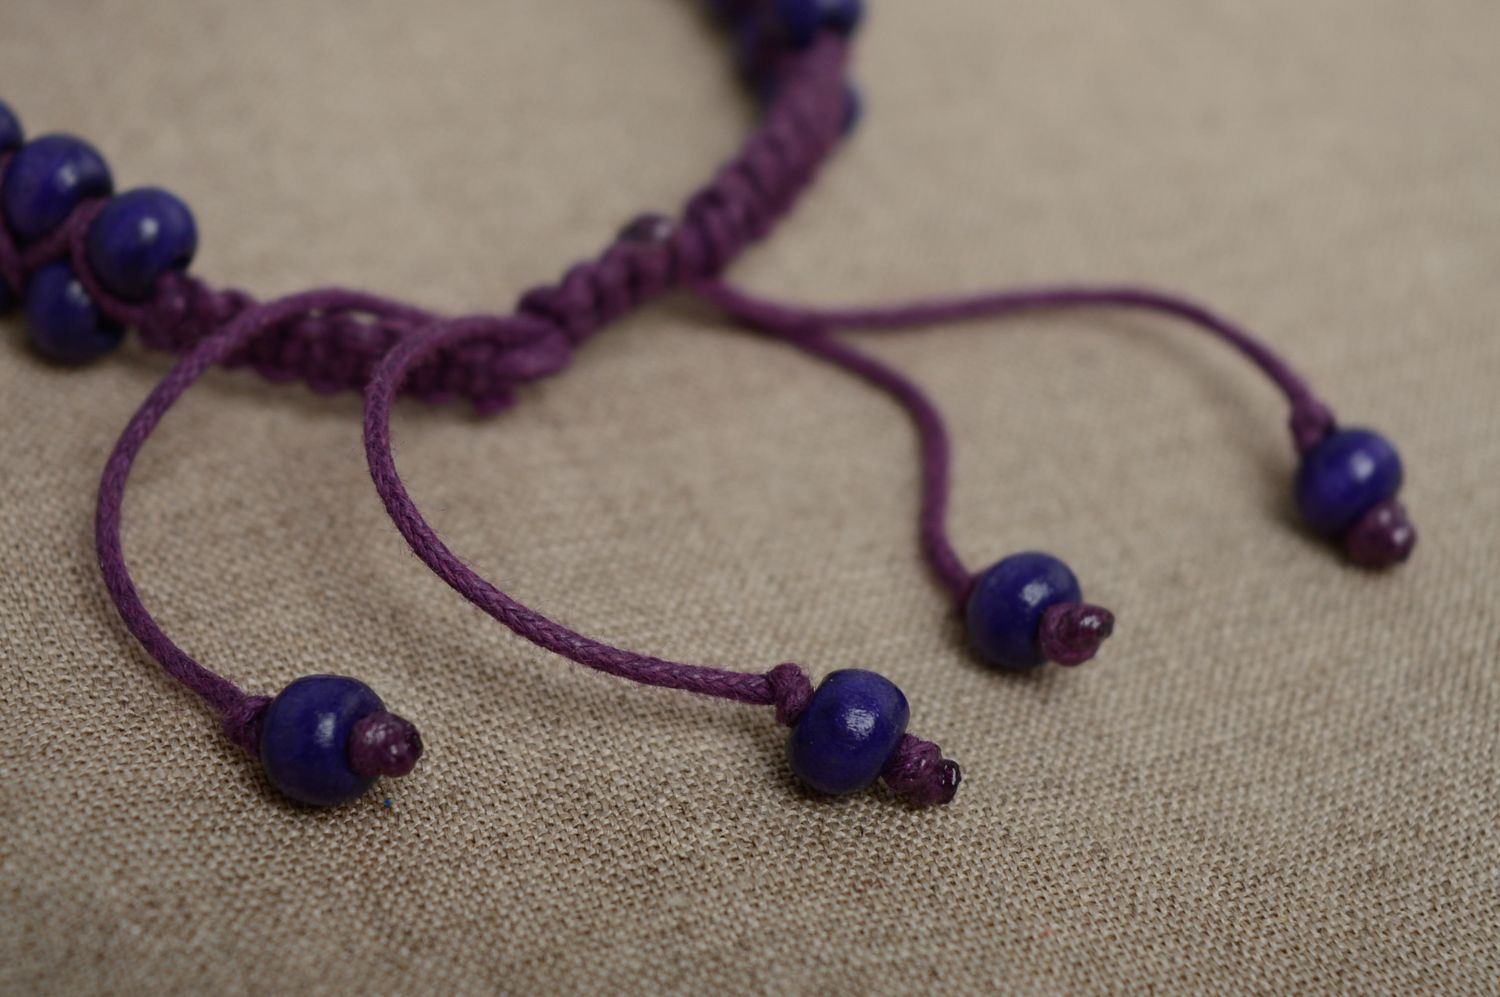 Violet macrame bracelet made of waxed cord and wooden beads photo 4